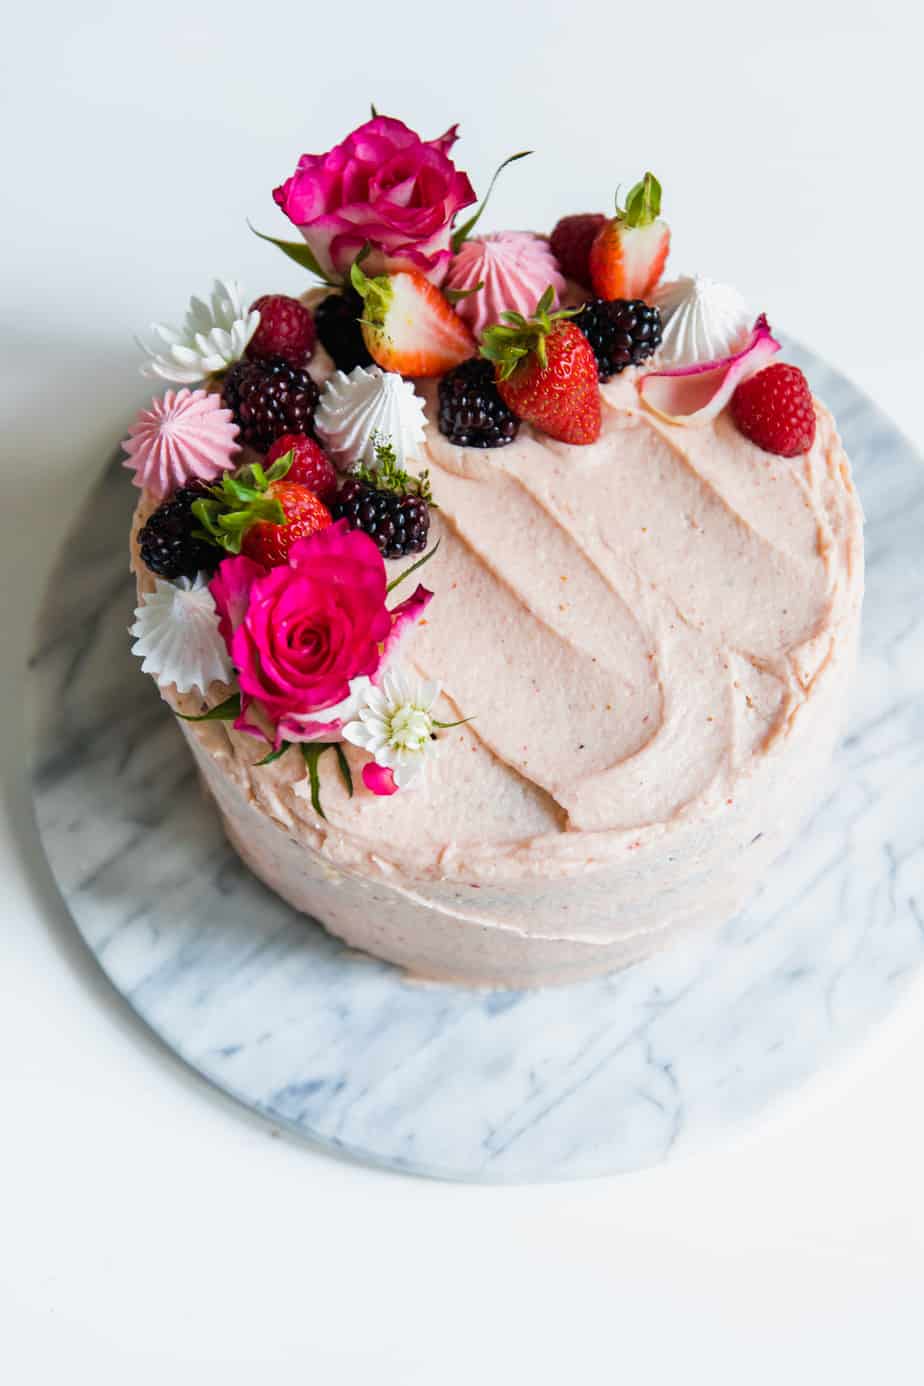 Win a trip to New York worth R150 000 with Lancewood Cheese and use this Chocolate Cake with Strawberry Cream Cheese Frosting recipe as inspiration for your decadent creations!